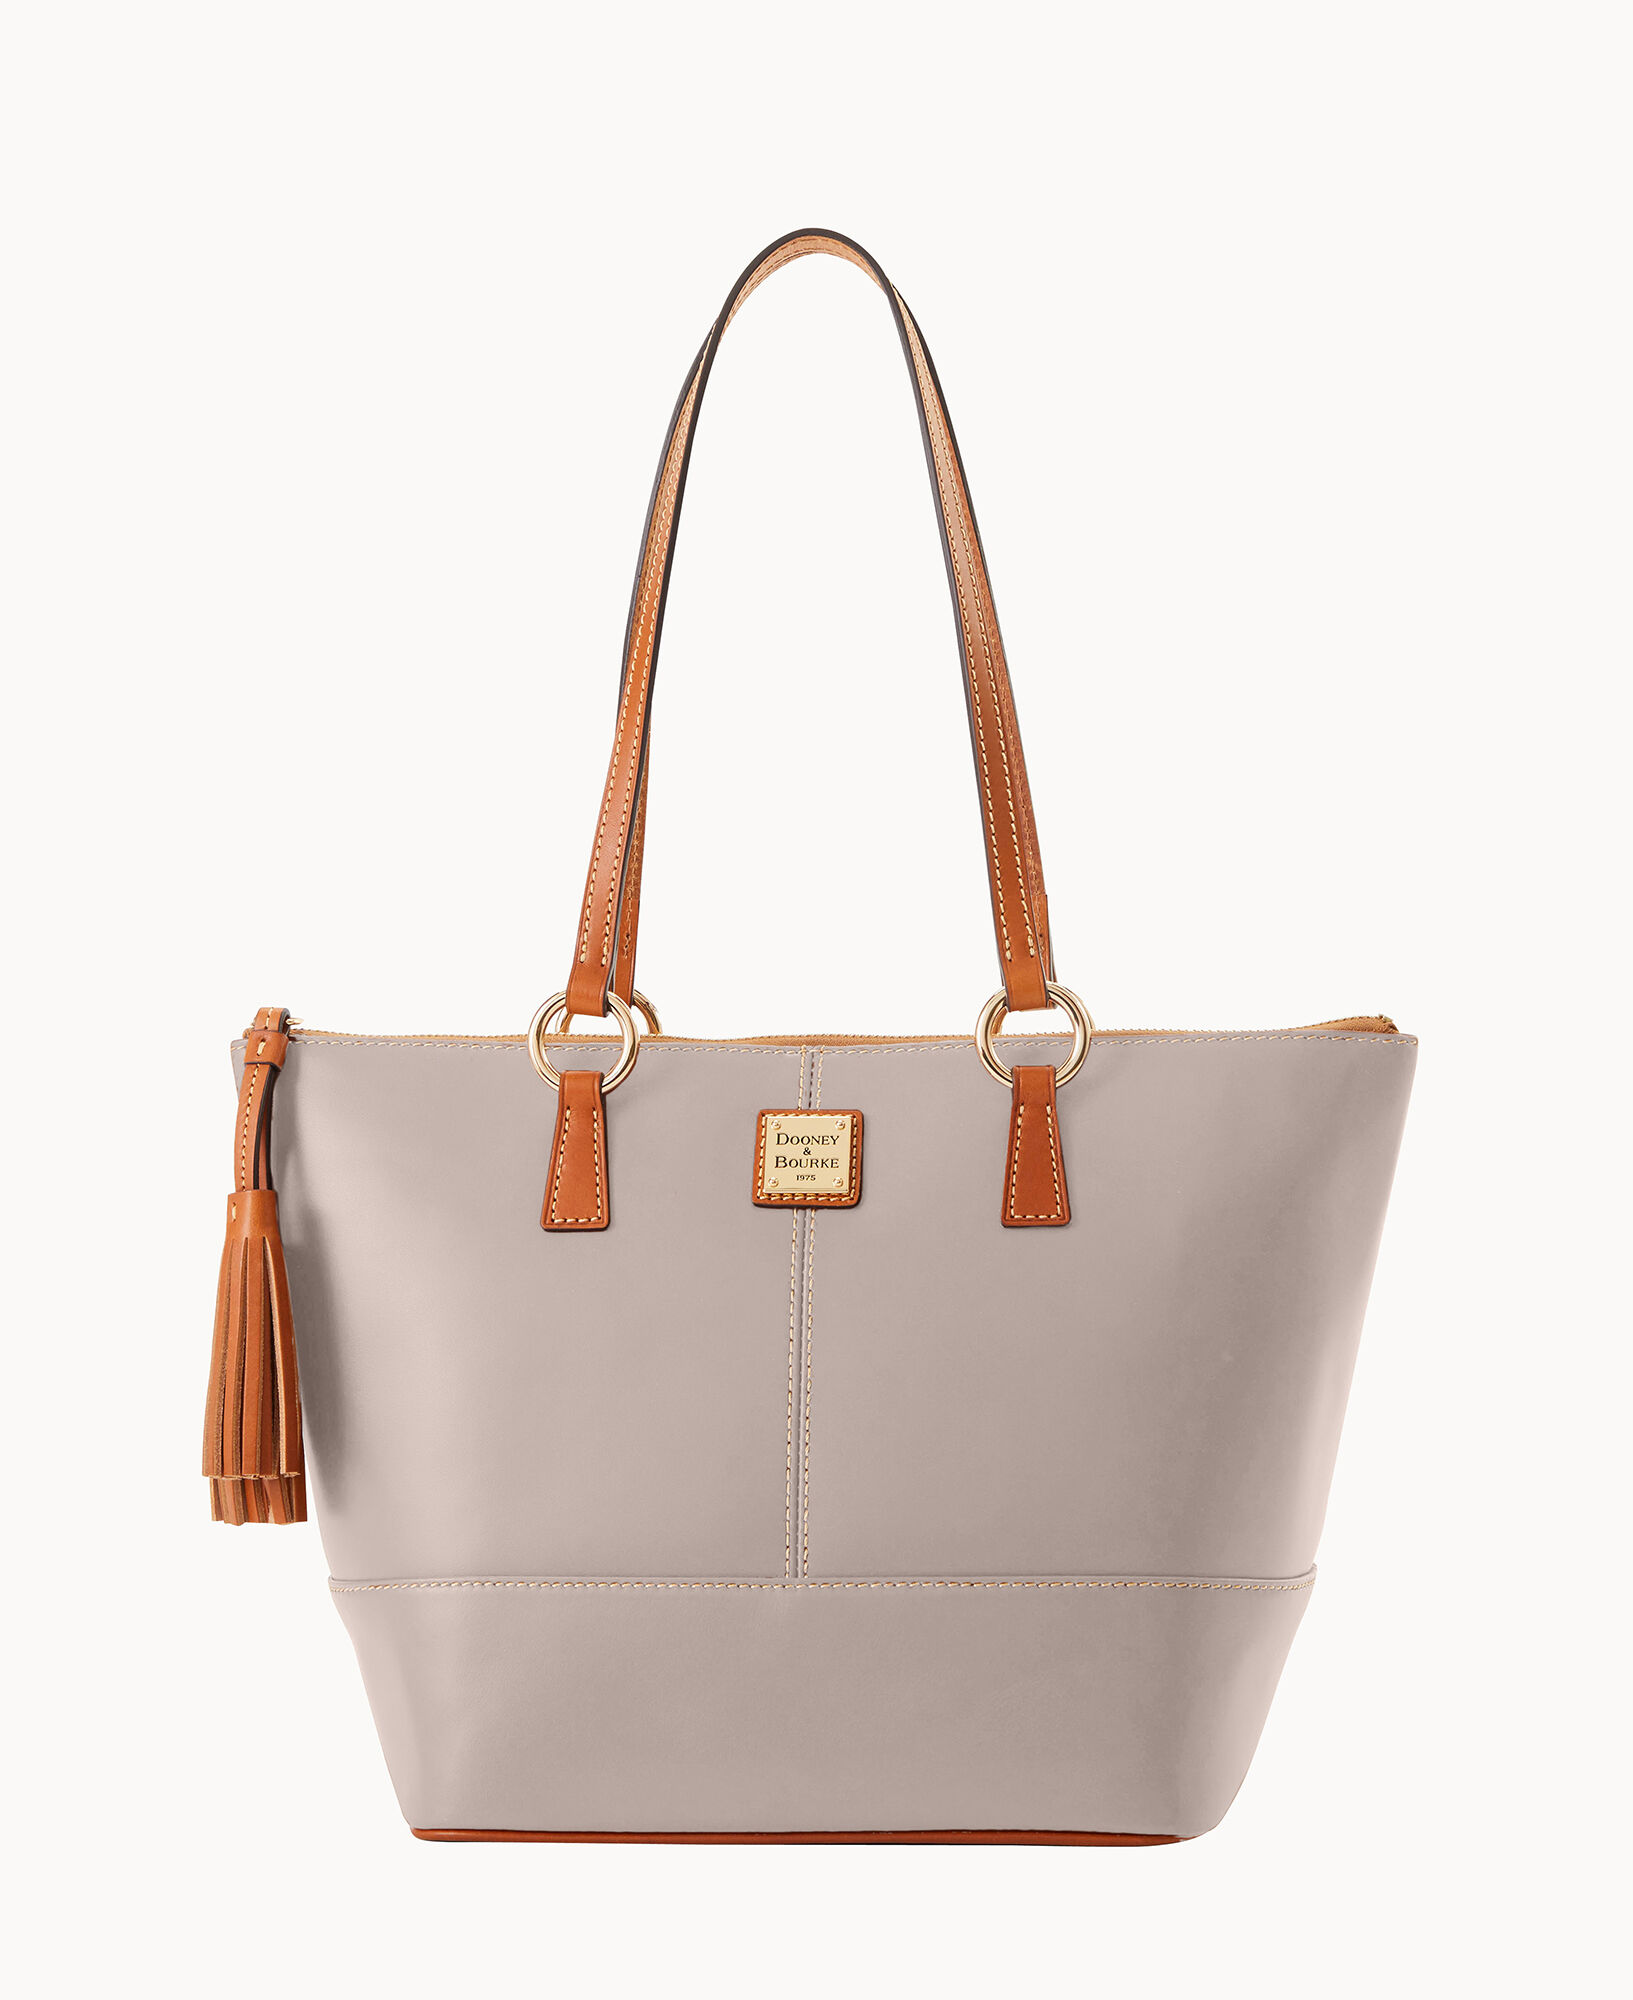 Dooney & Bourke Saffiano Leather Small Tobi Shopper, Best Price and  Reviews